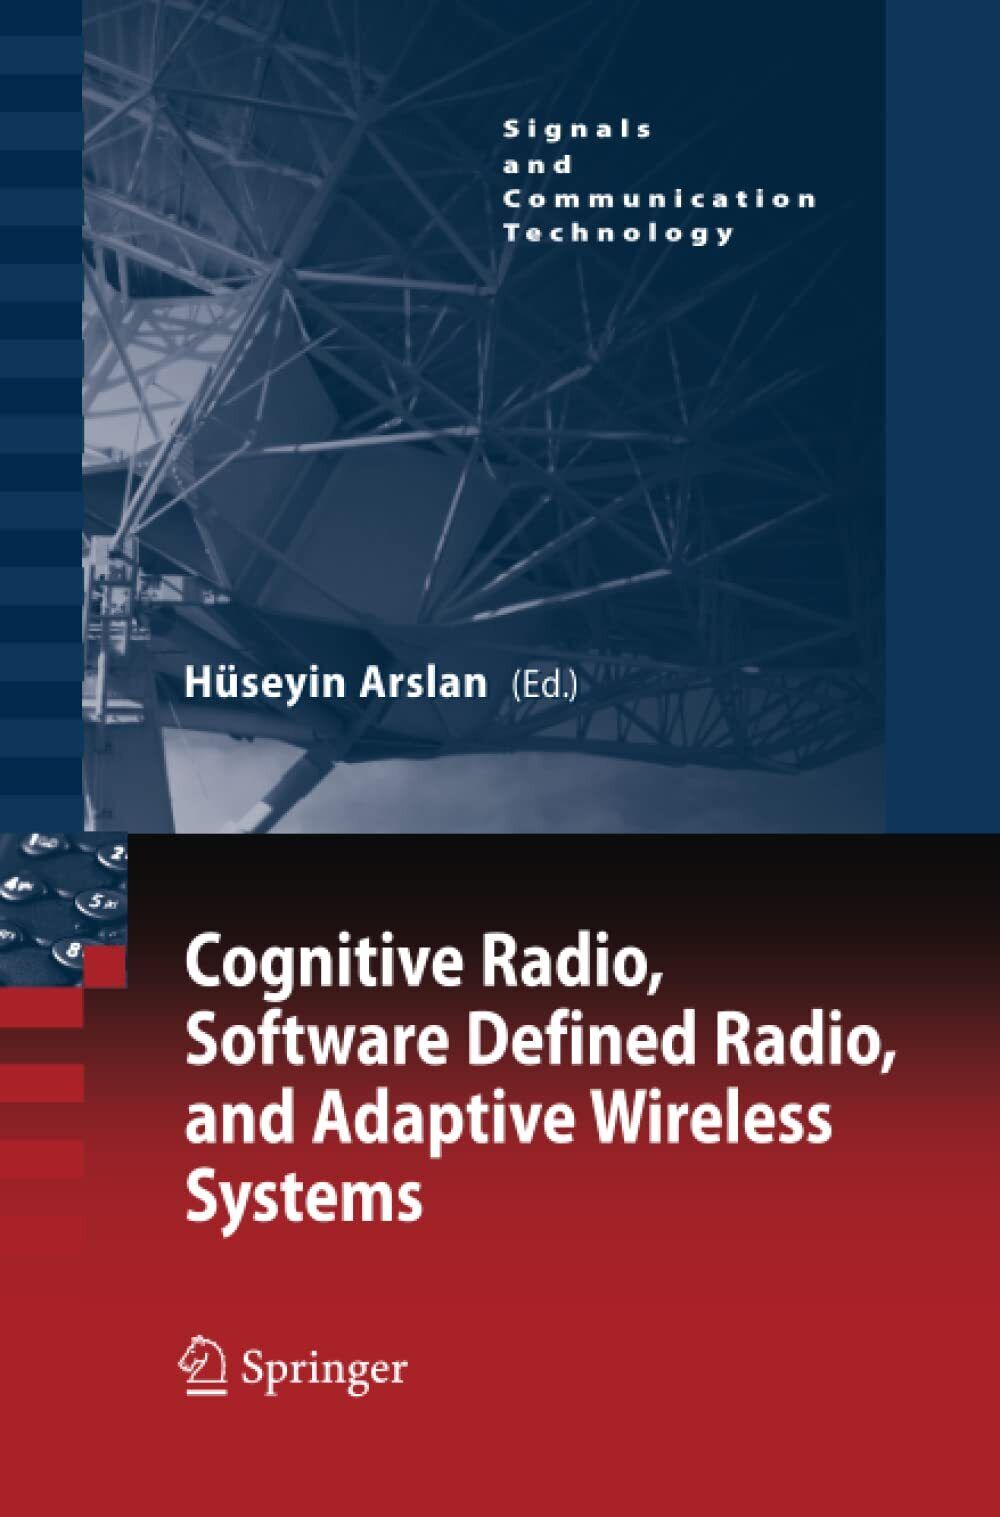 Cognitive Radio, Software Defined Radio, and Adaptive Wireless Systems - 2014